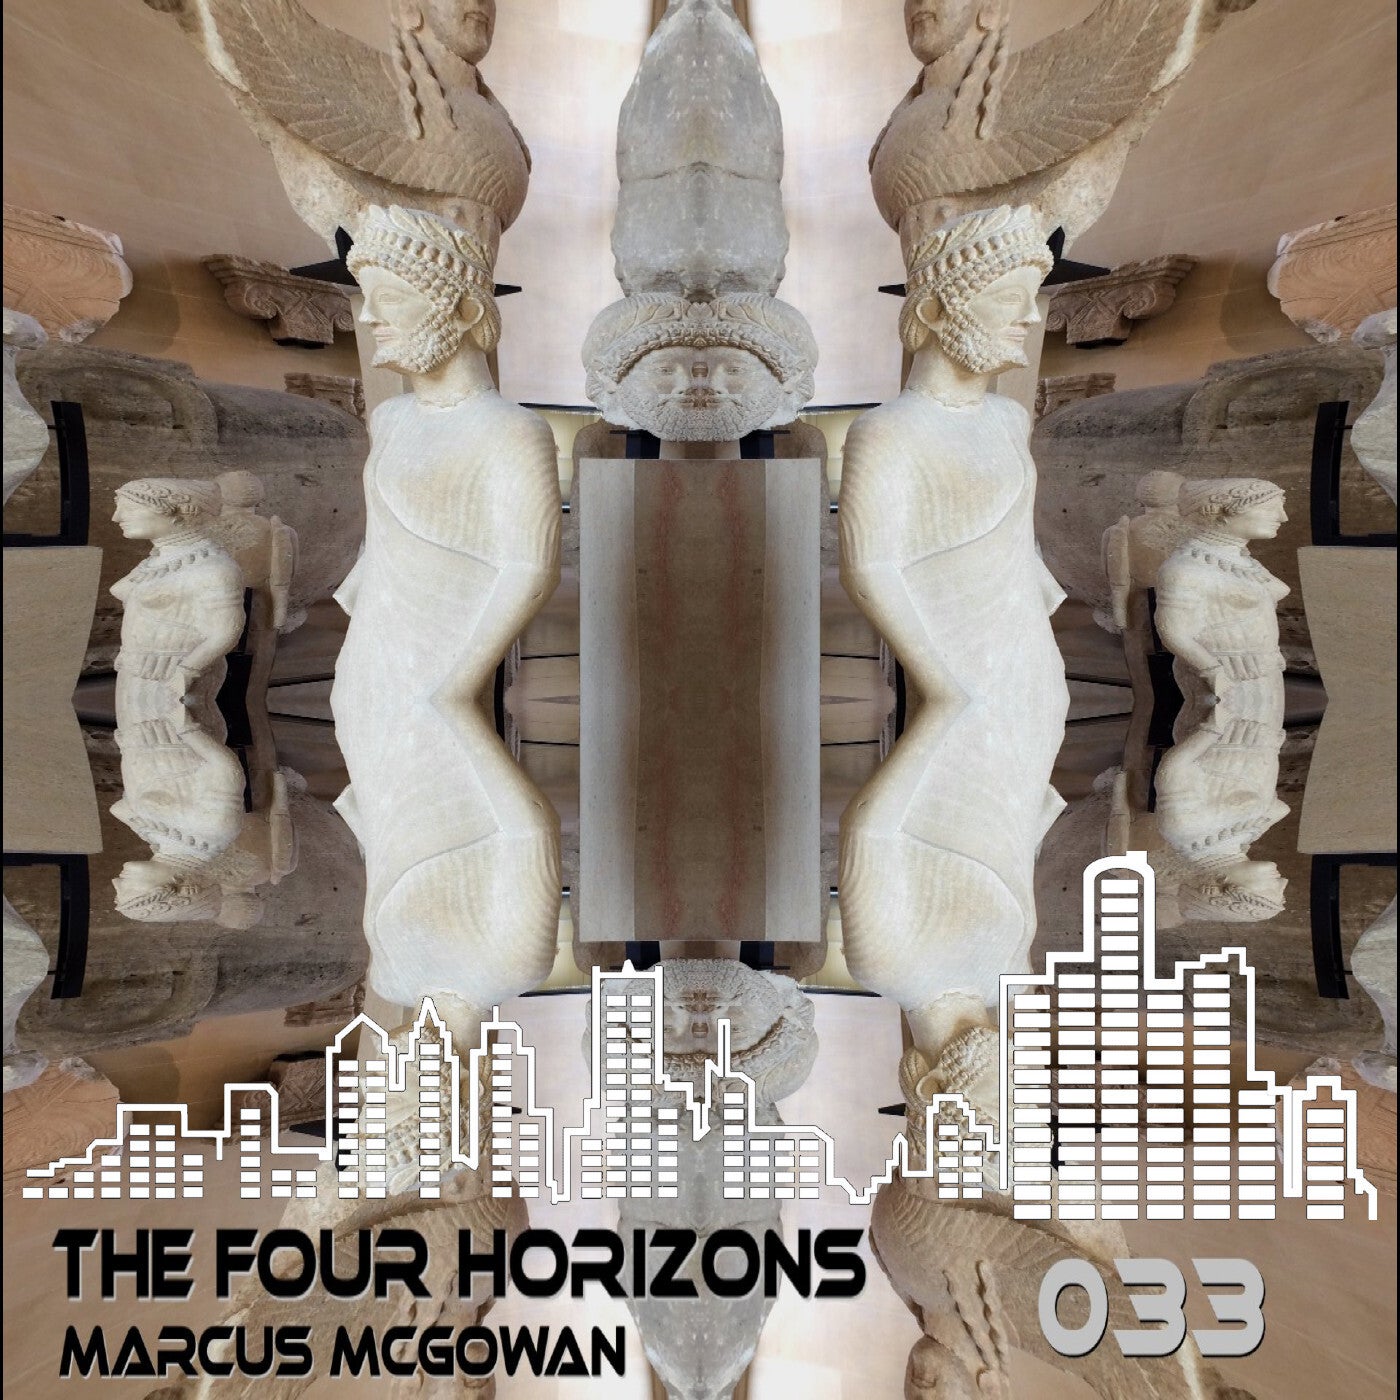 The Four Horizons